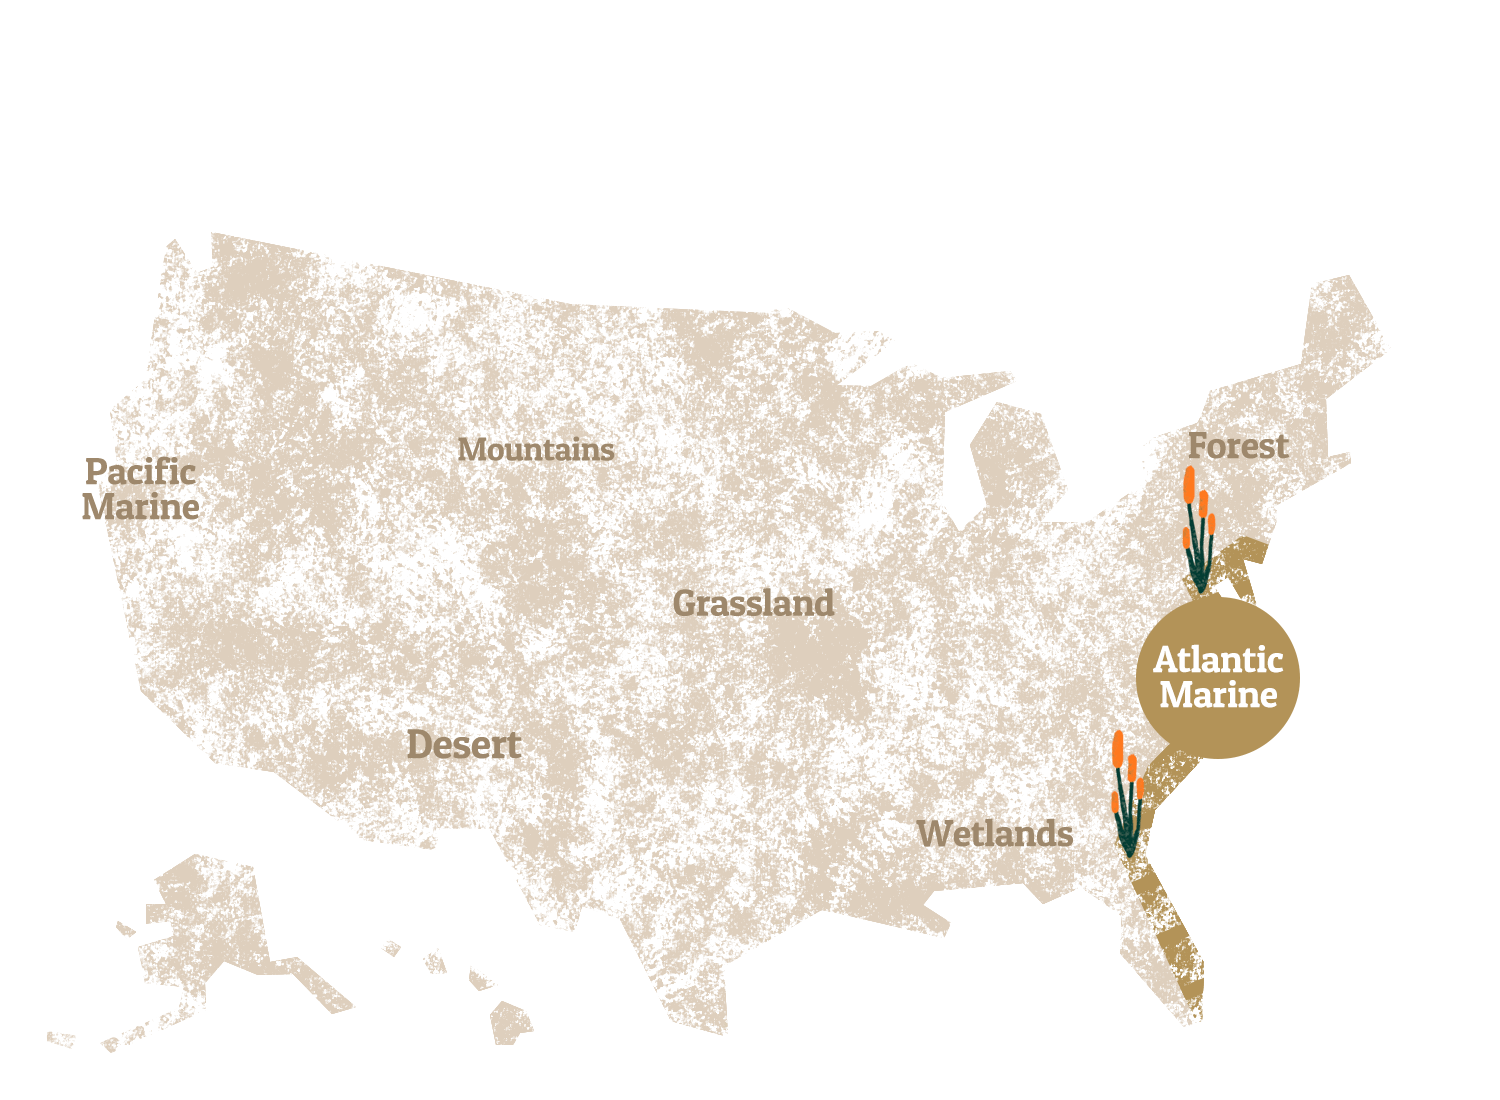 A graphic map of the United States, highlighting the Atlantic Marine.